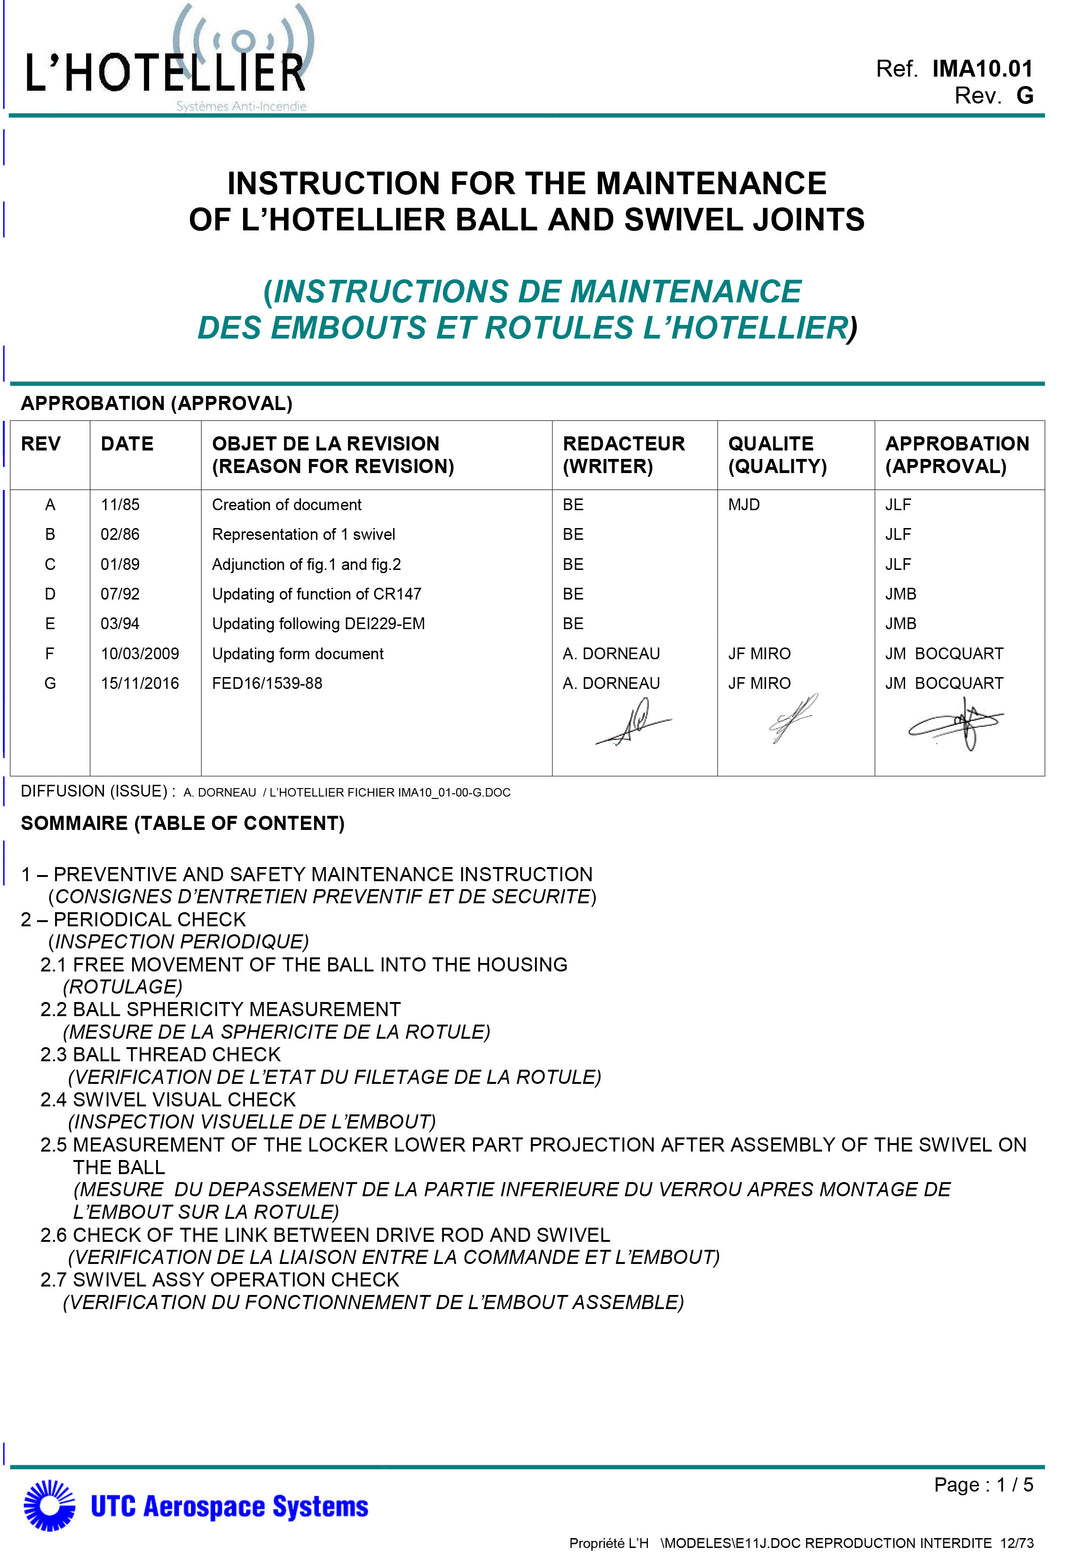 L'Hotellier Connector Maintenance Instructions